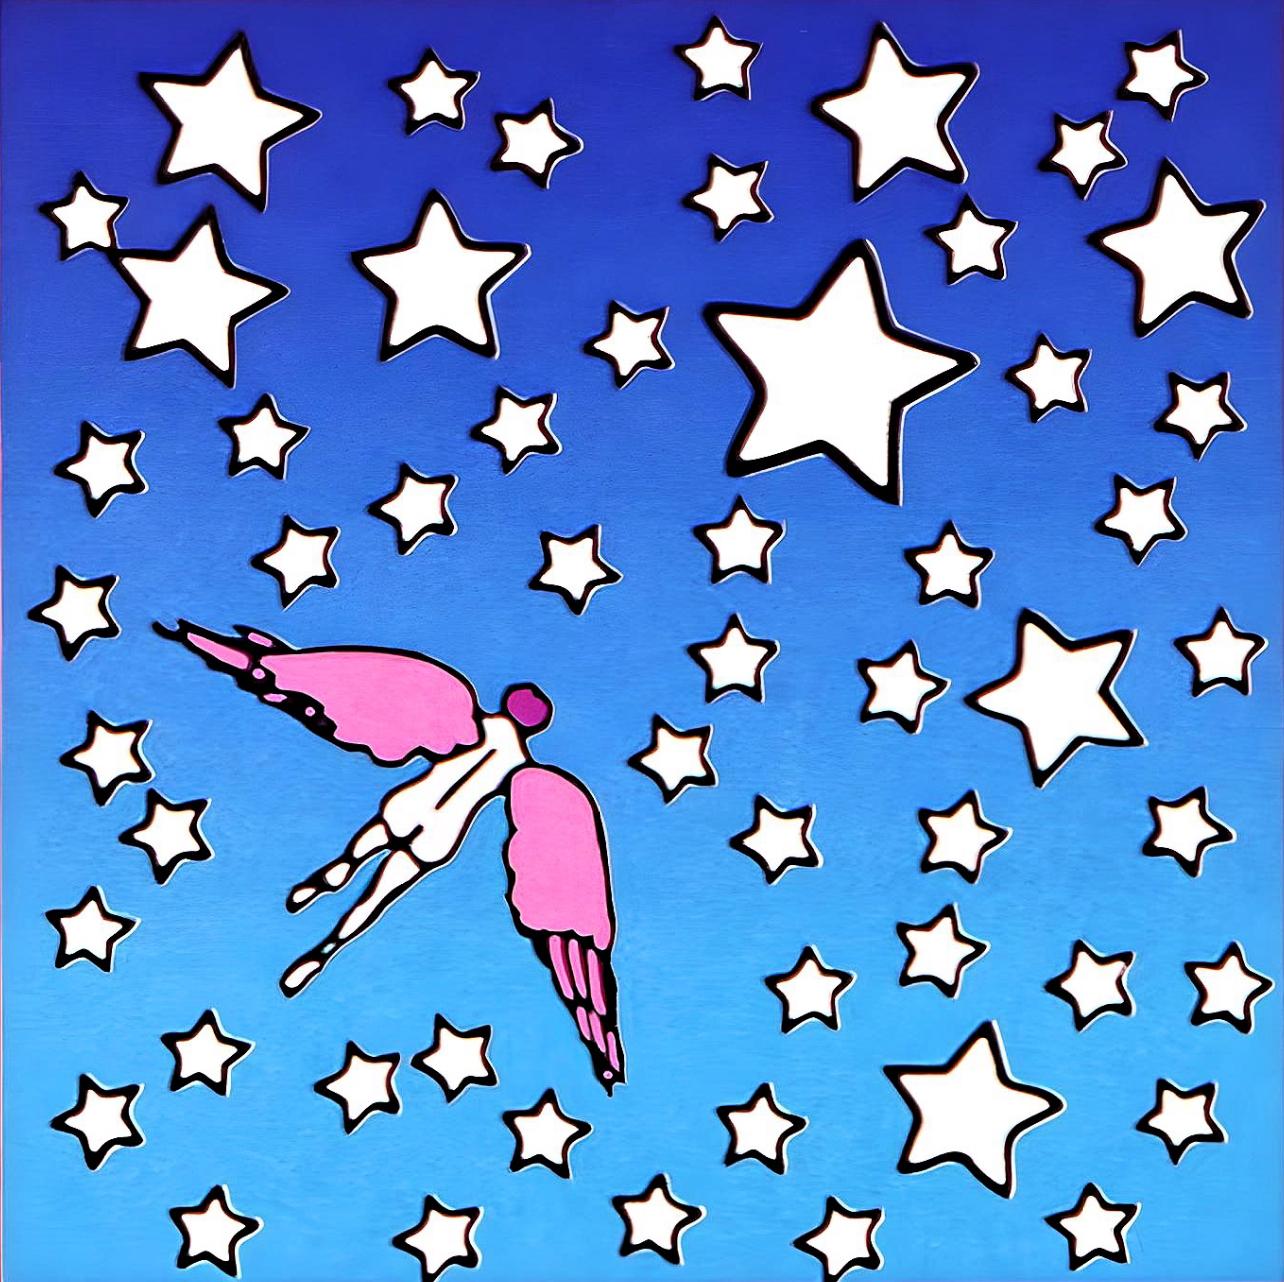 Artist: Peter Max (1937)
Title: Winged Flyer In Space
Year: 2002
Edition: 500/500, plus proofs
Medium: Lithograph on archival paper
Size: 4.87 x 4.5 inches
Condition: Excellent
Inscription: Signed and numbered by the artist.
Notes: Published by Via